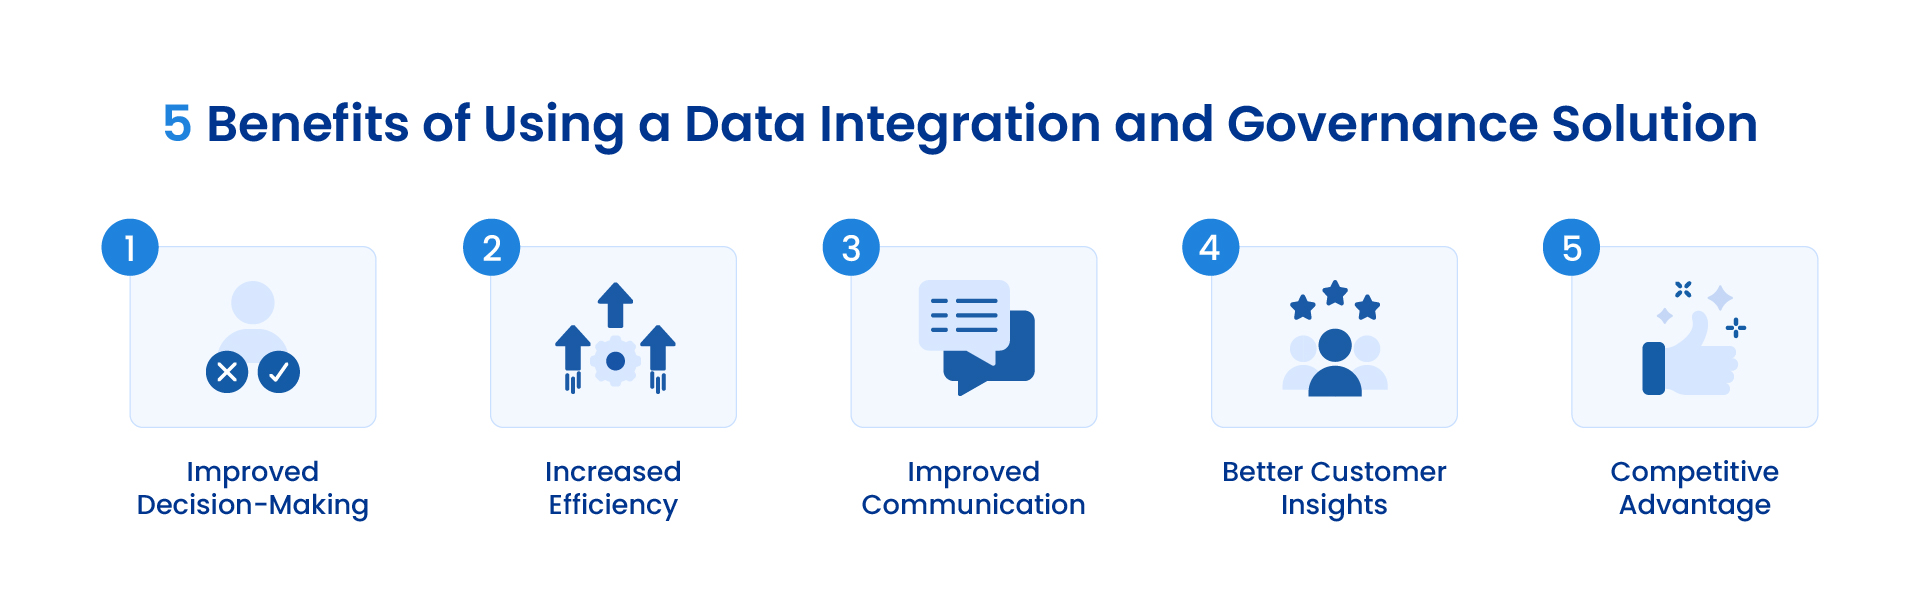 5 Benefits of Using a Data Integration and Governance Solution